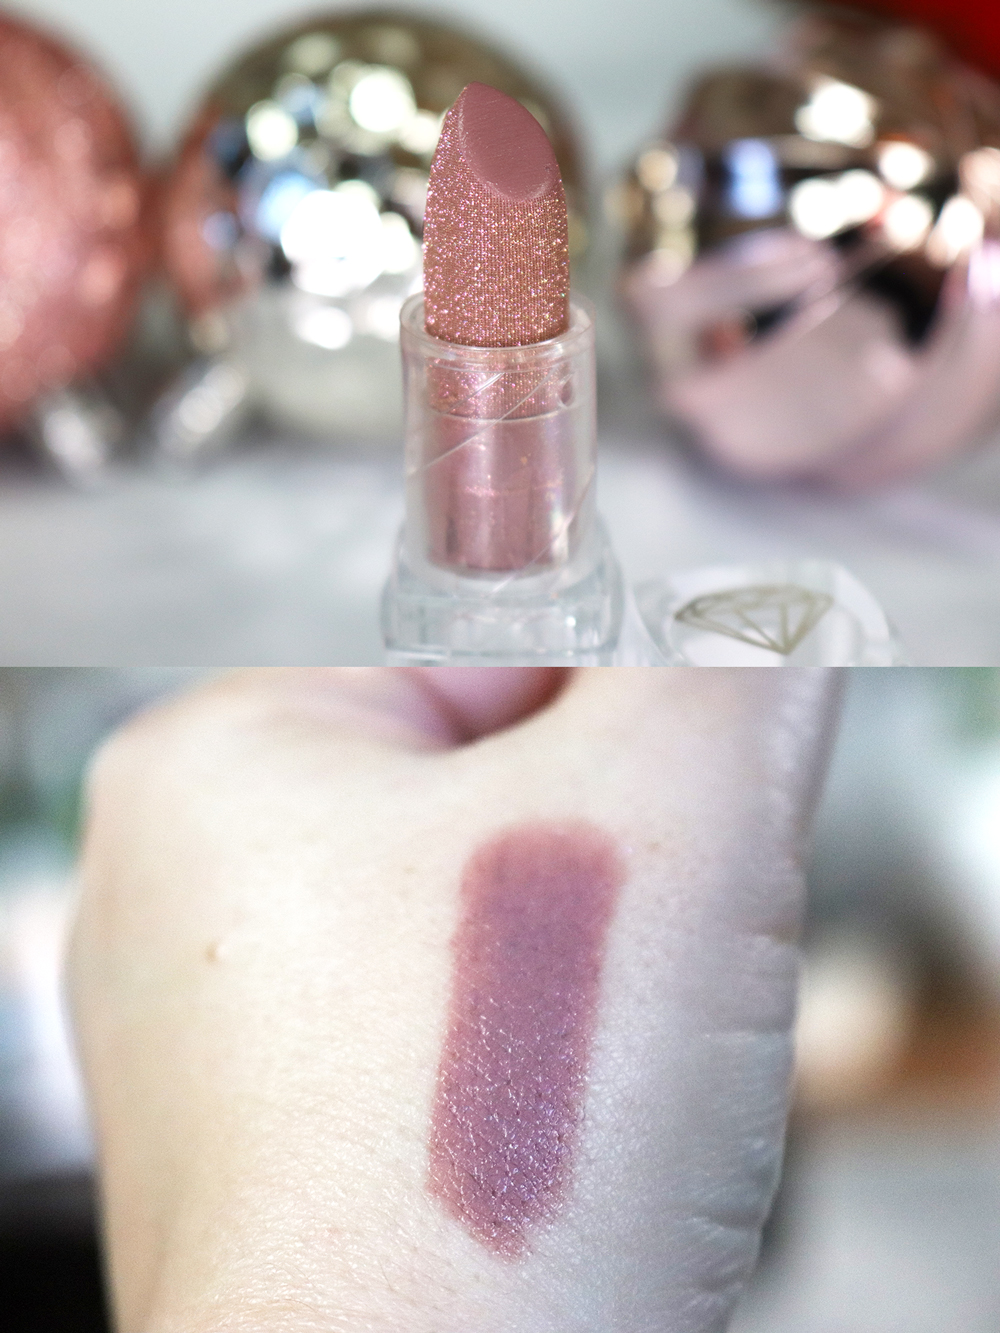 Cruelty Free Holiday Gift Guide 2020 - NYX Diamonds and Ice Please Shout Loud lipstick in Royal Clapback